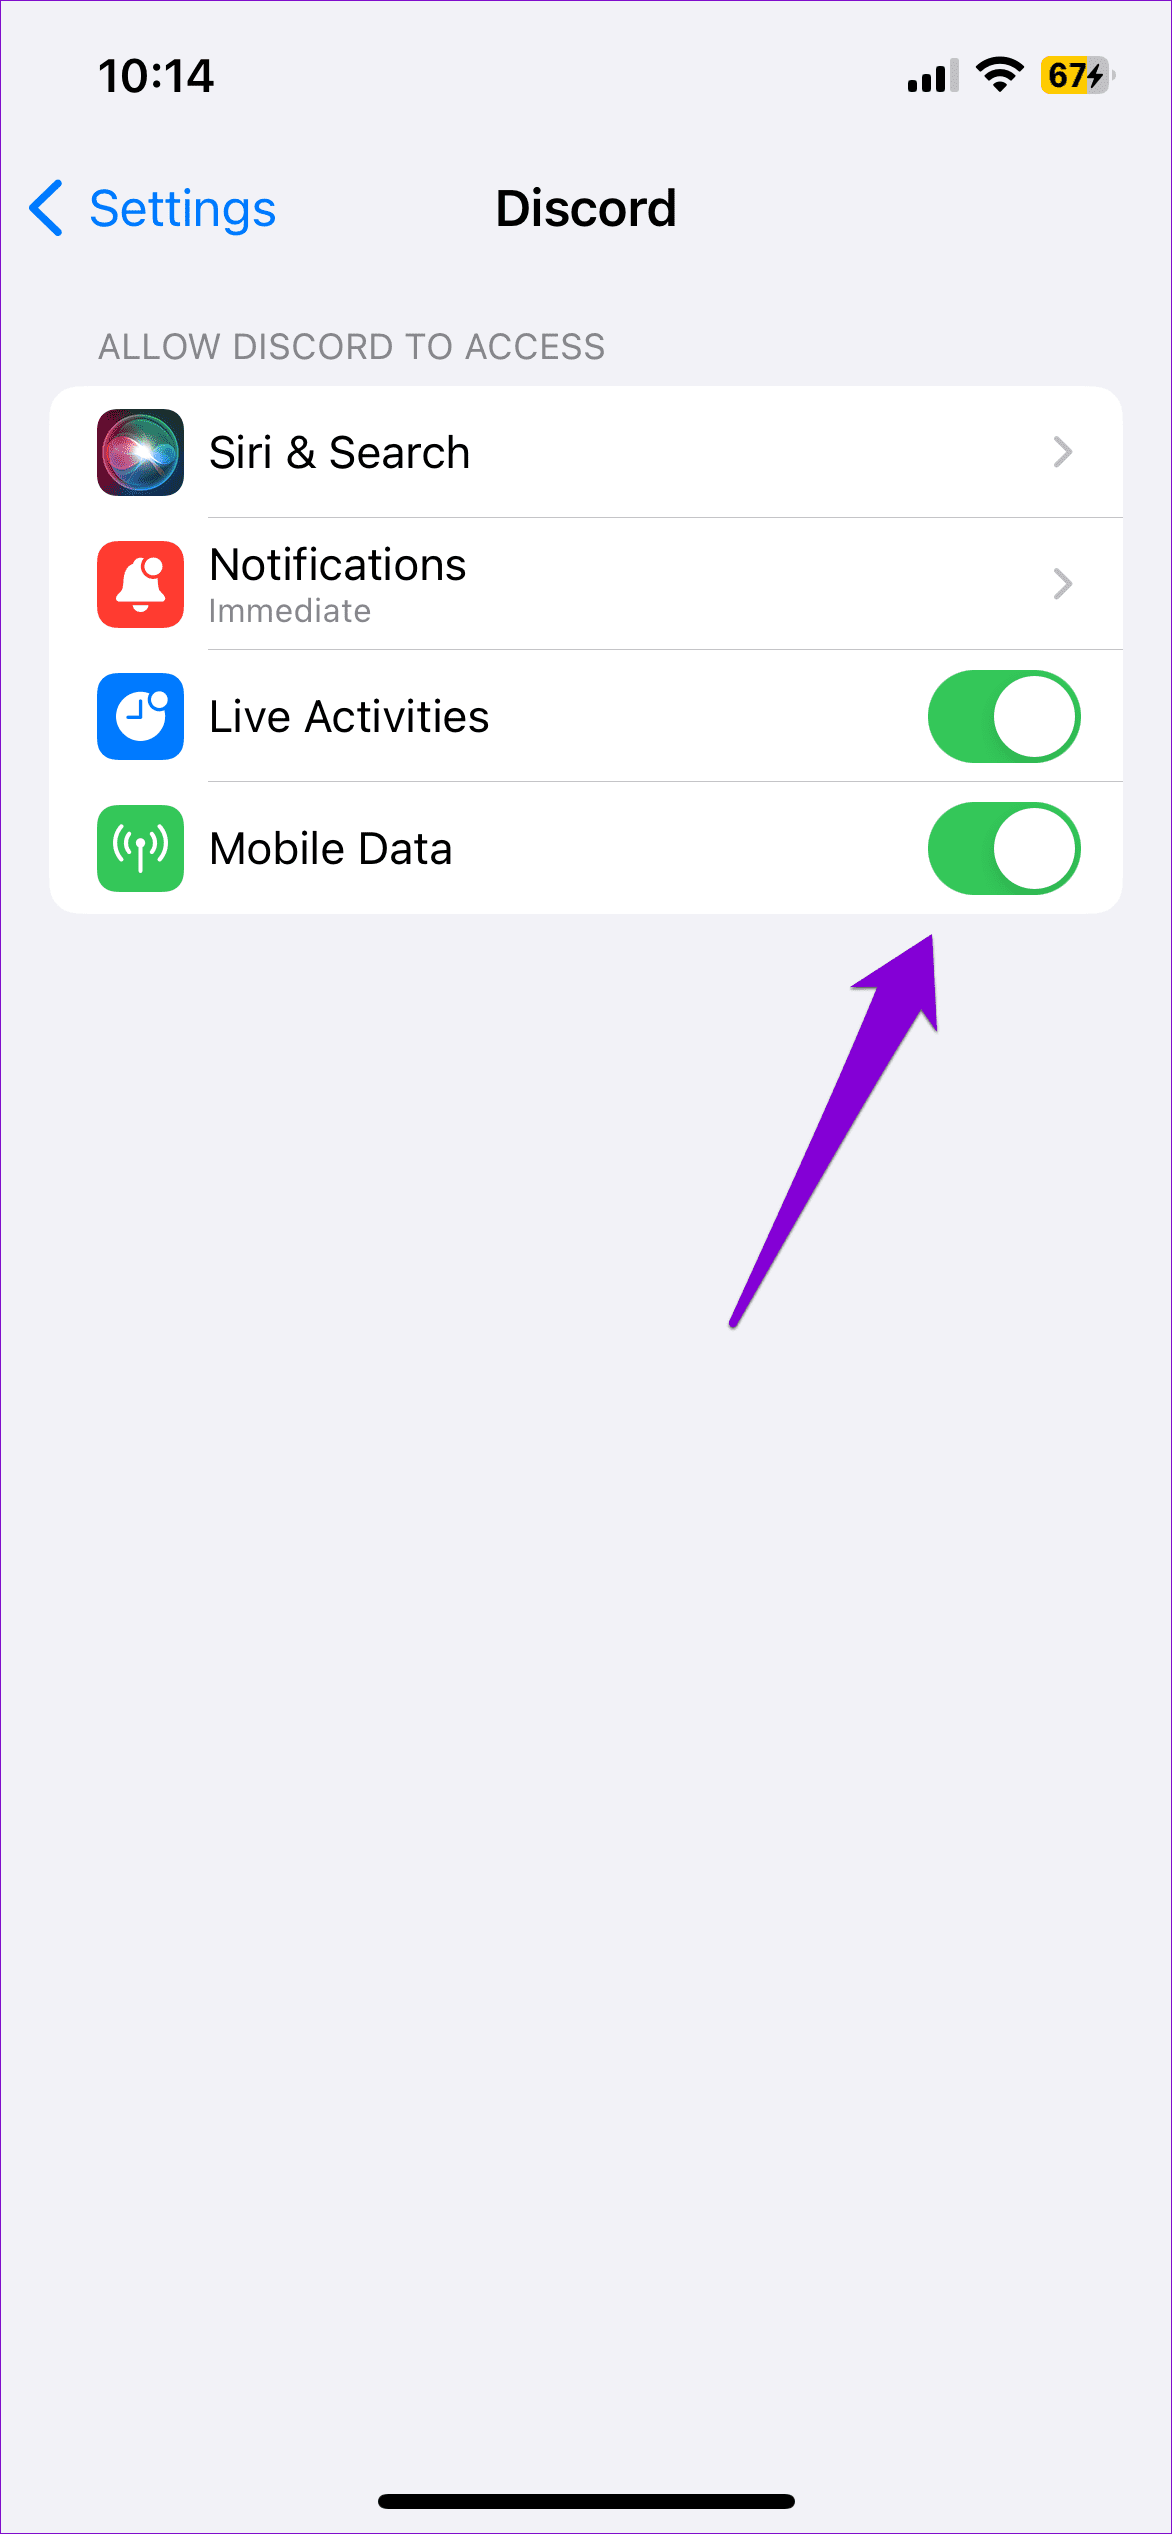 Enable Mobile Data for Discord on iPhone